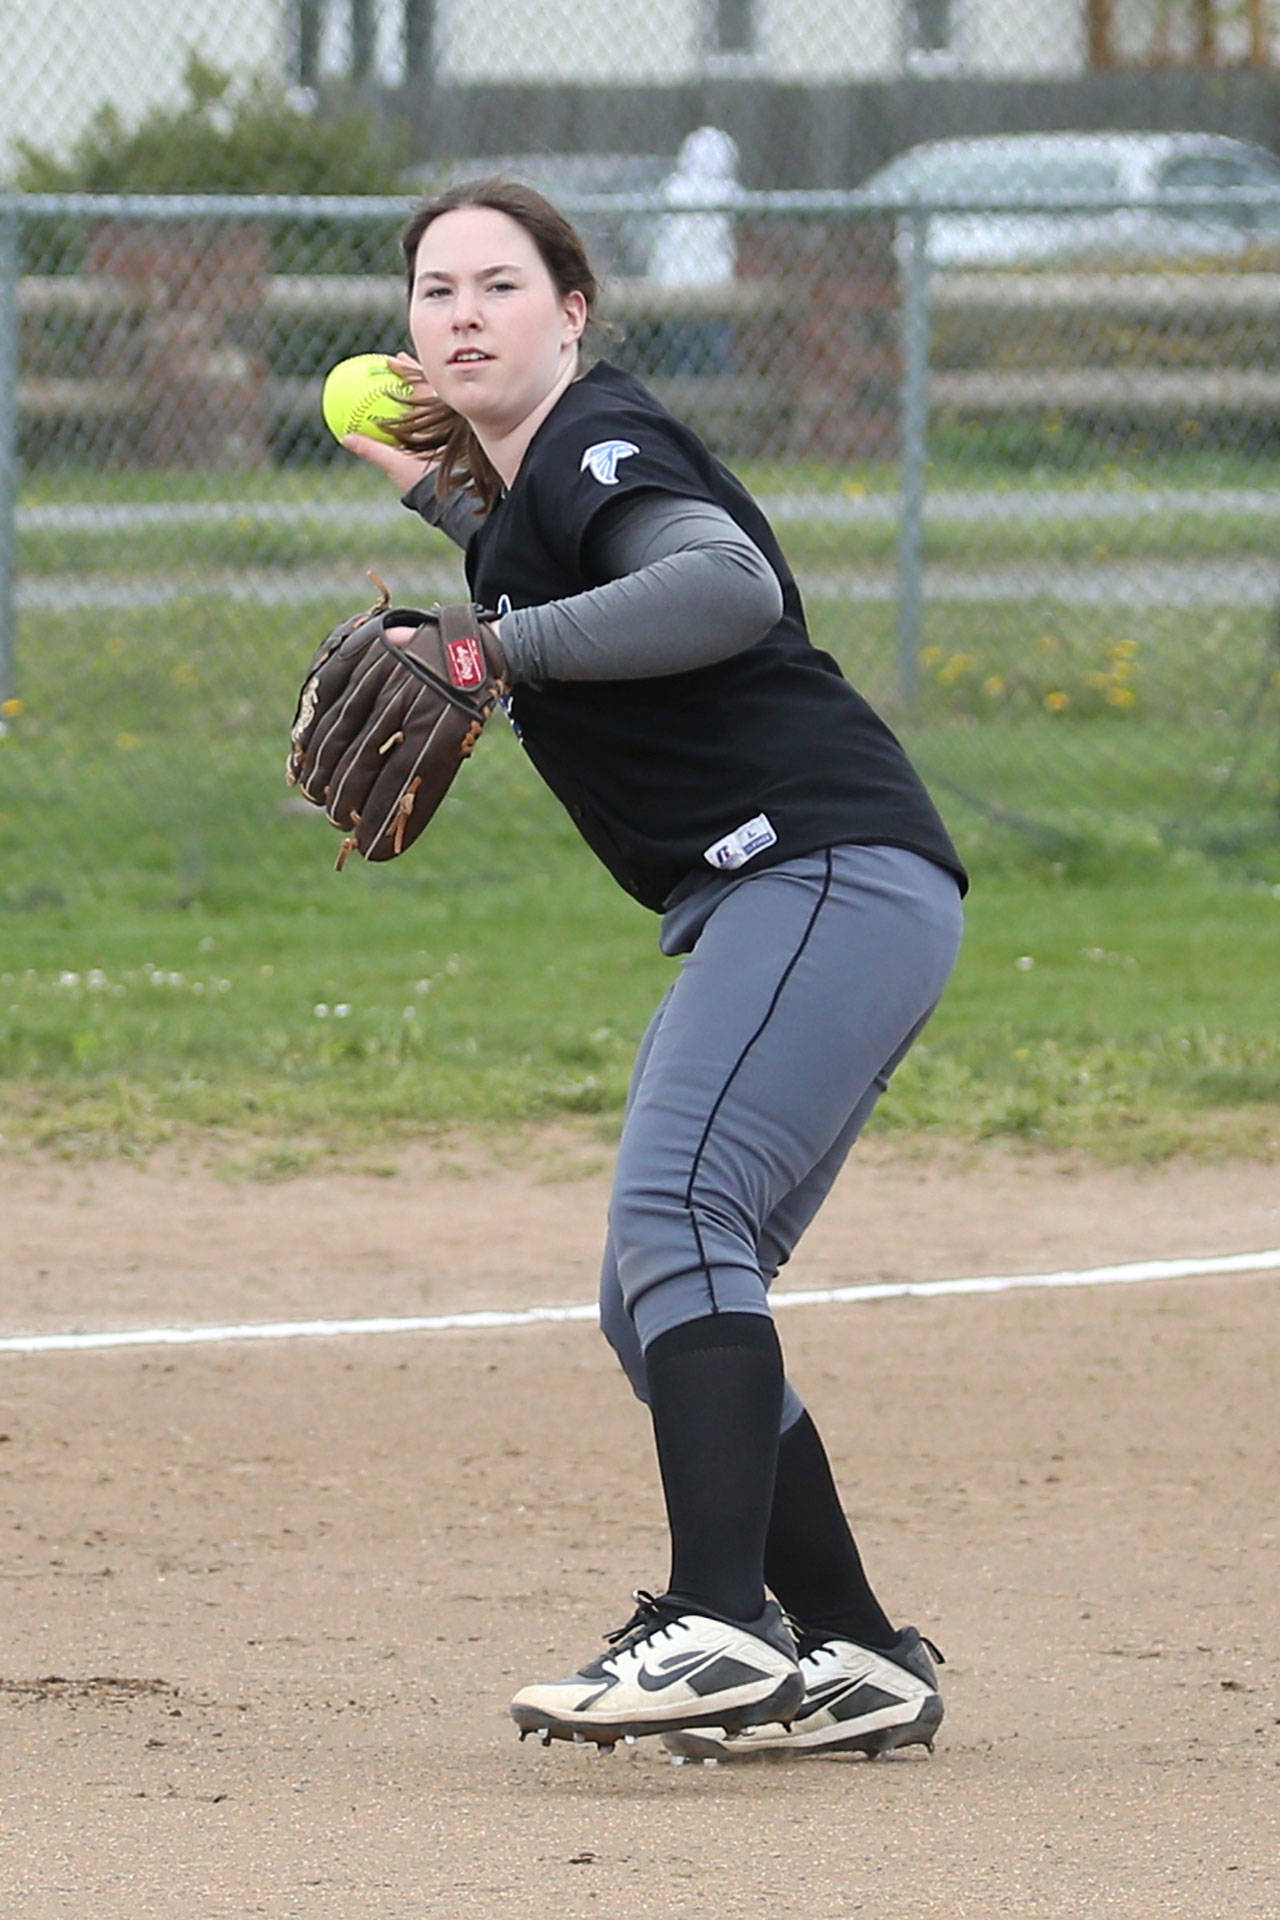 South Whidbey’s Natalie Wilmoth starred on softball diamond but shines even brighter off. (Photo by John Fisken)